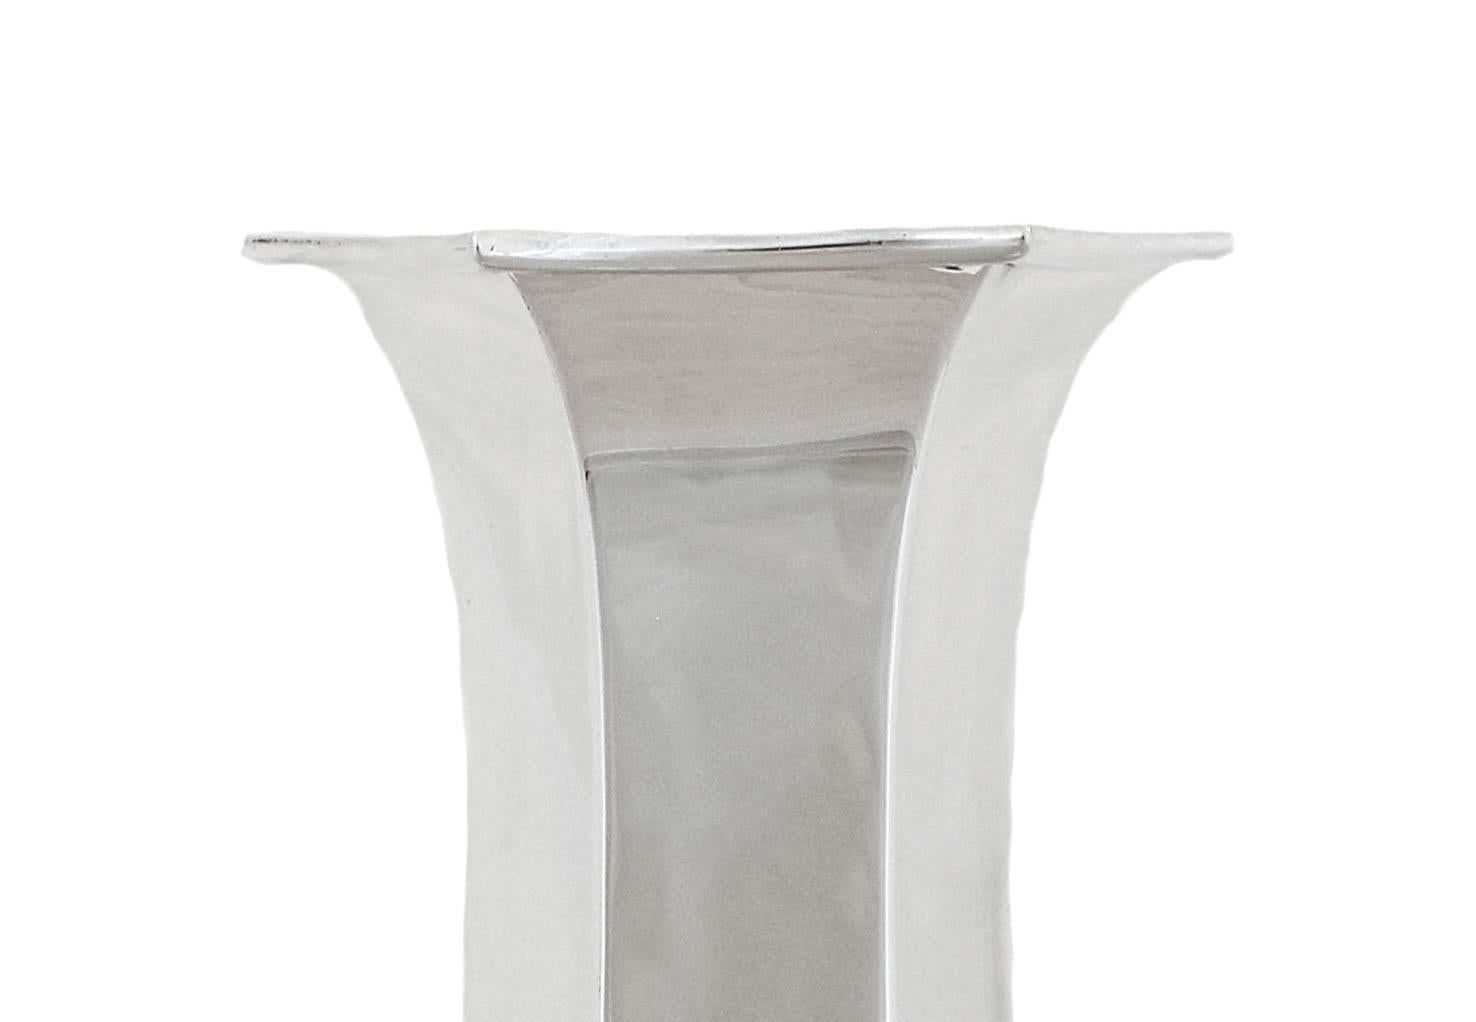 Proudly offering this gorgeous sterling silver vase from the early twentieth century by the Redlich Silver Company.  It has a striking shape with paneling— six panels in total and is complimented by a hexagon base.  Notice how graceful the shape of